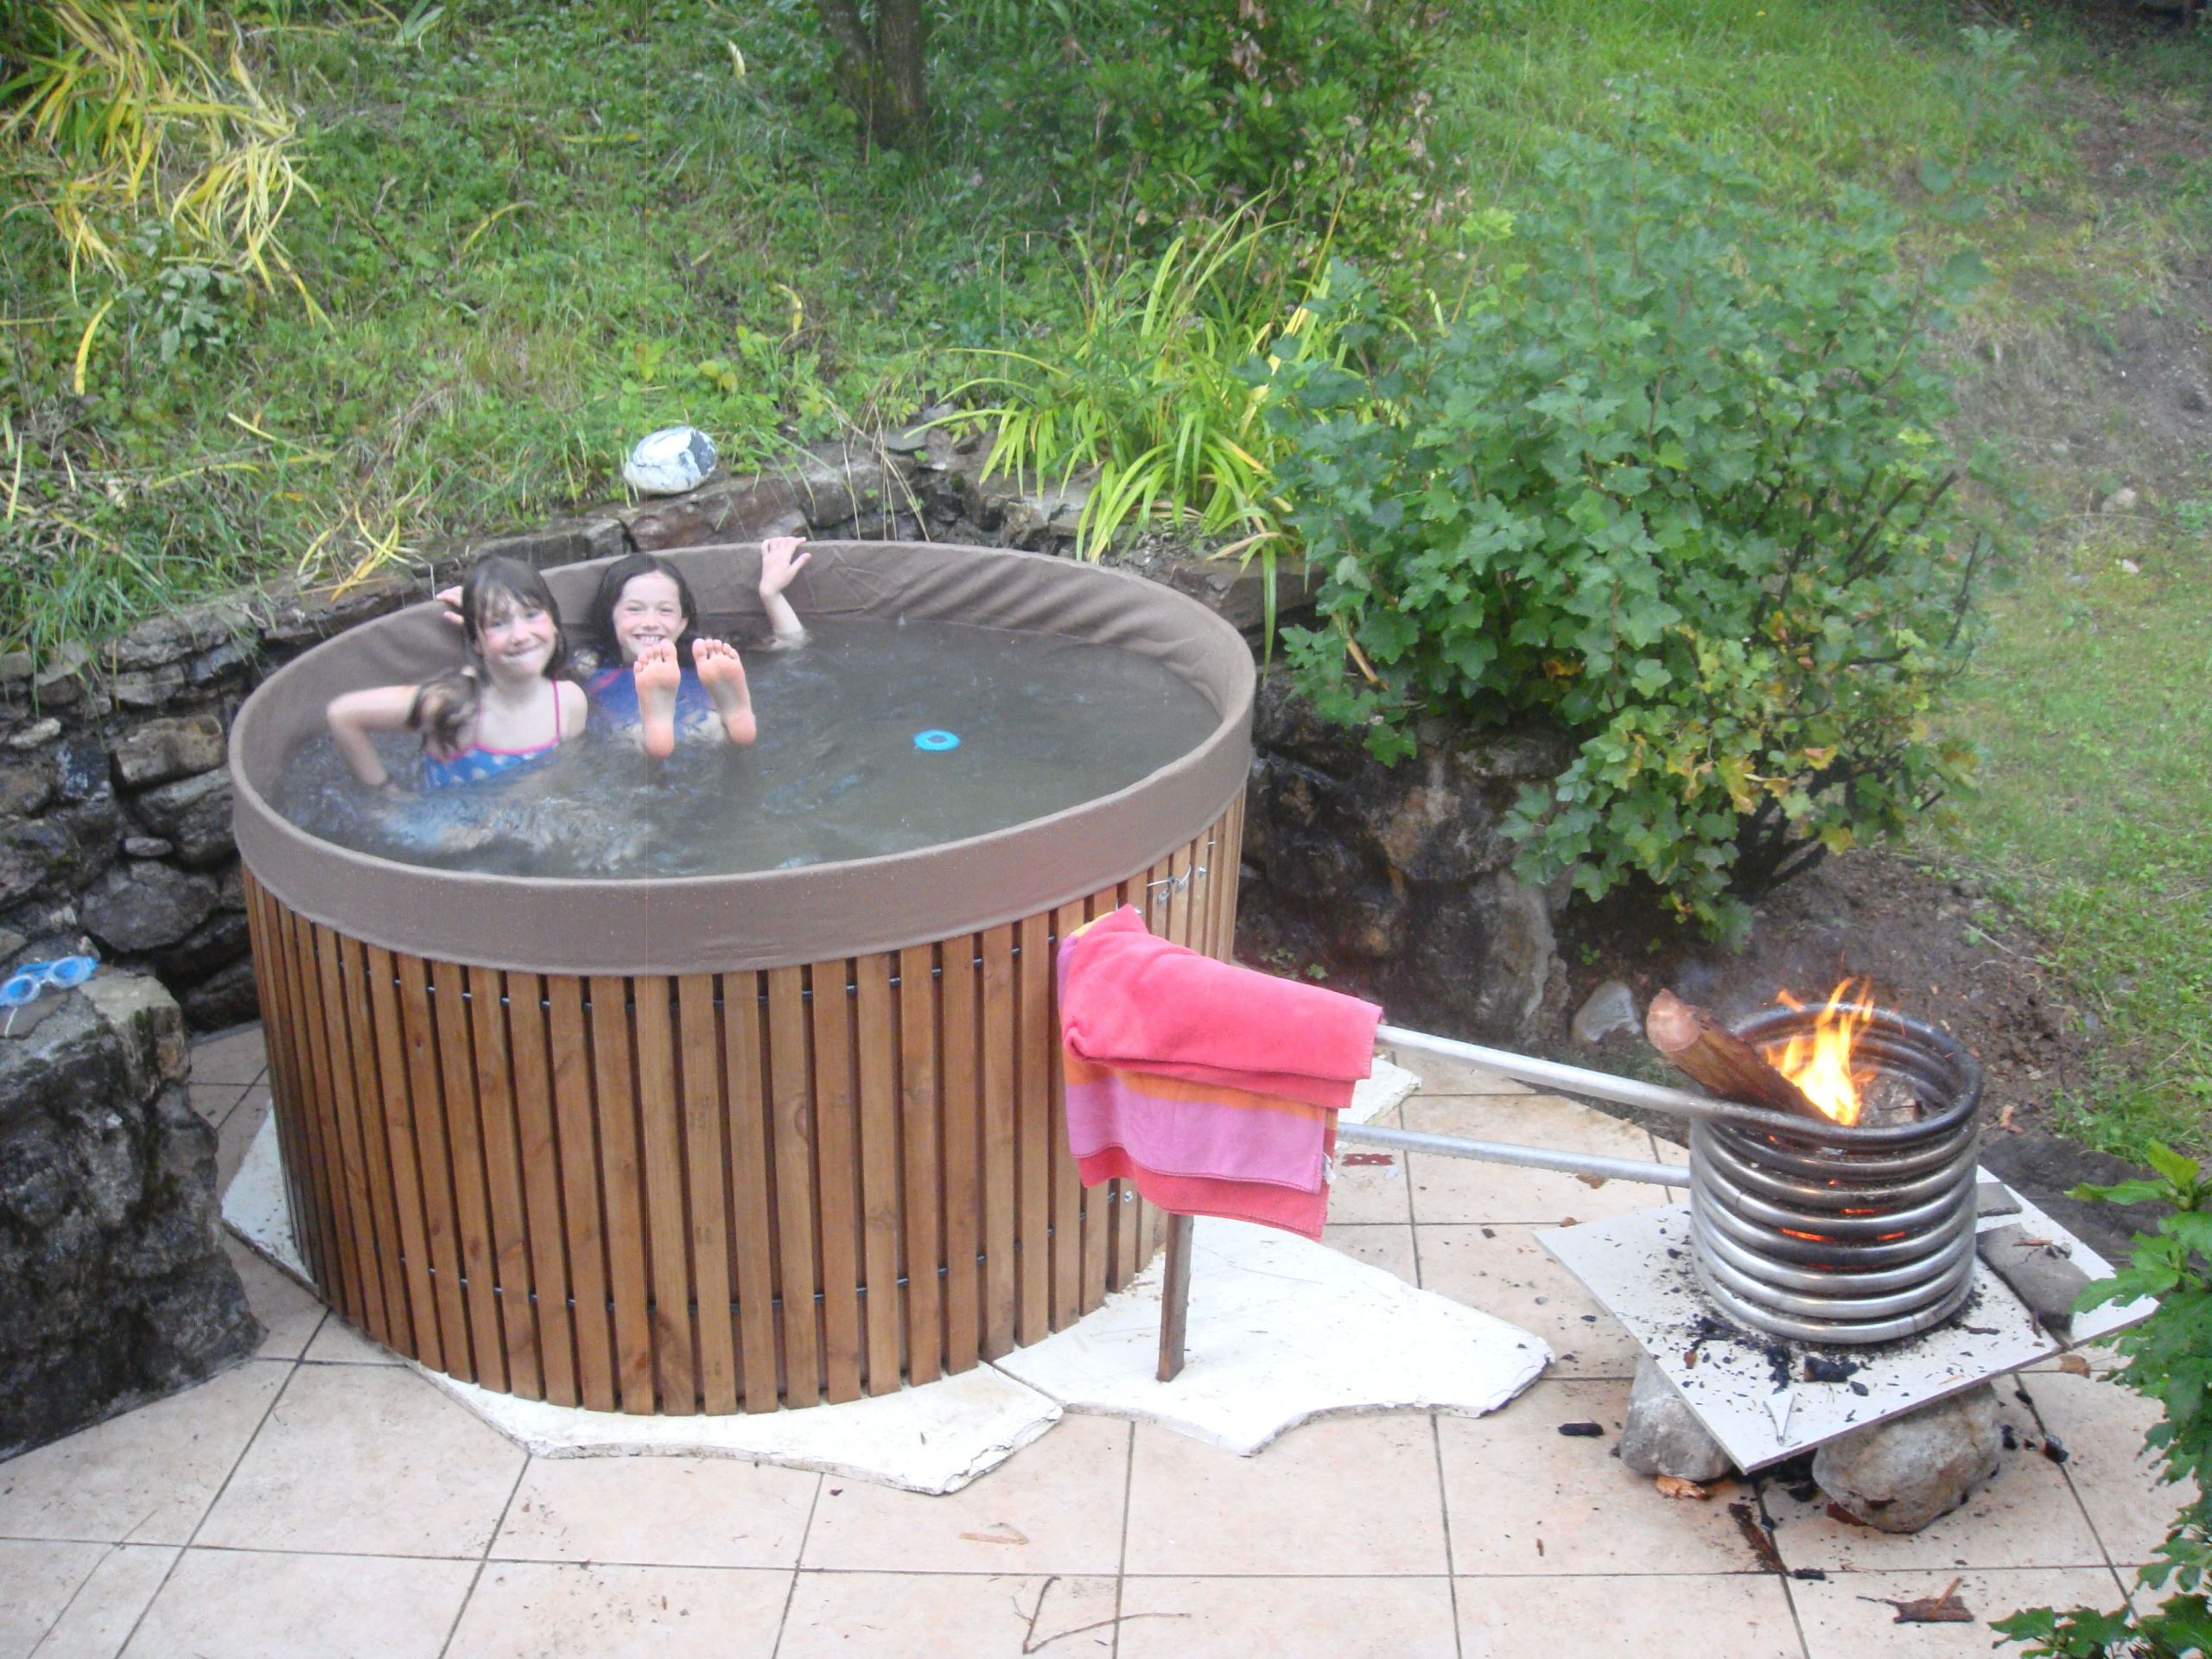 Wood Stove Hot Tub DIY
 Pin on projects